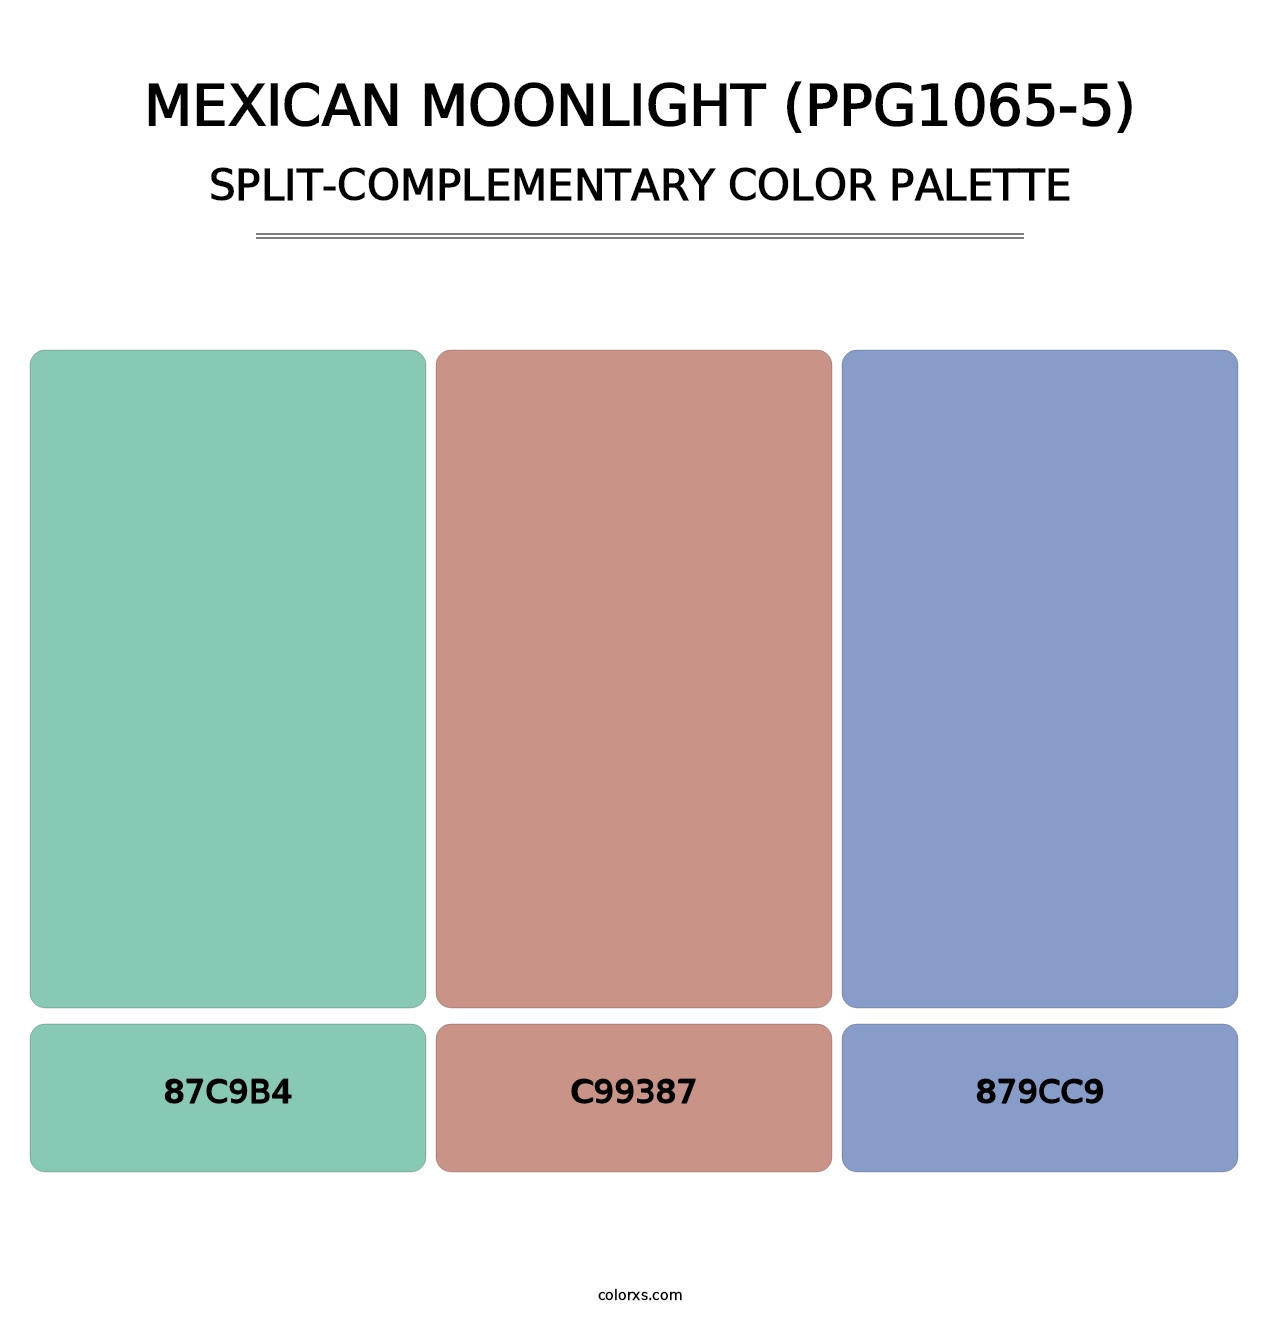 Mexican Moonlight (PPG1065-5) - Split-Complementary Color Palette